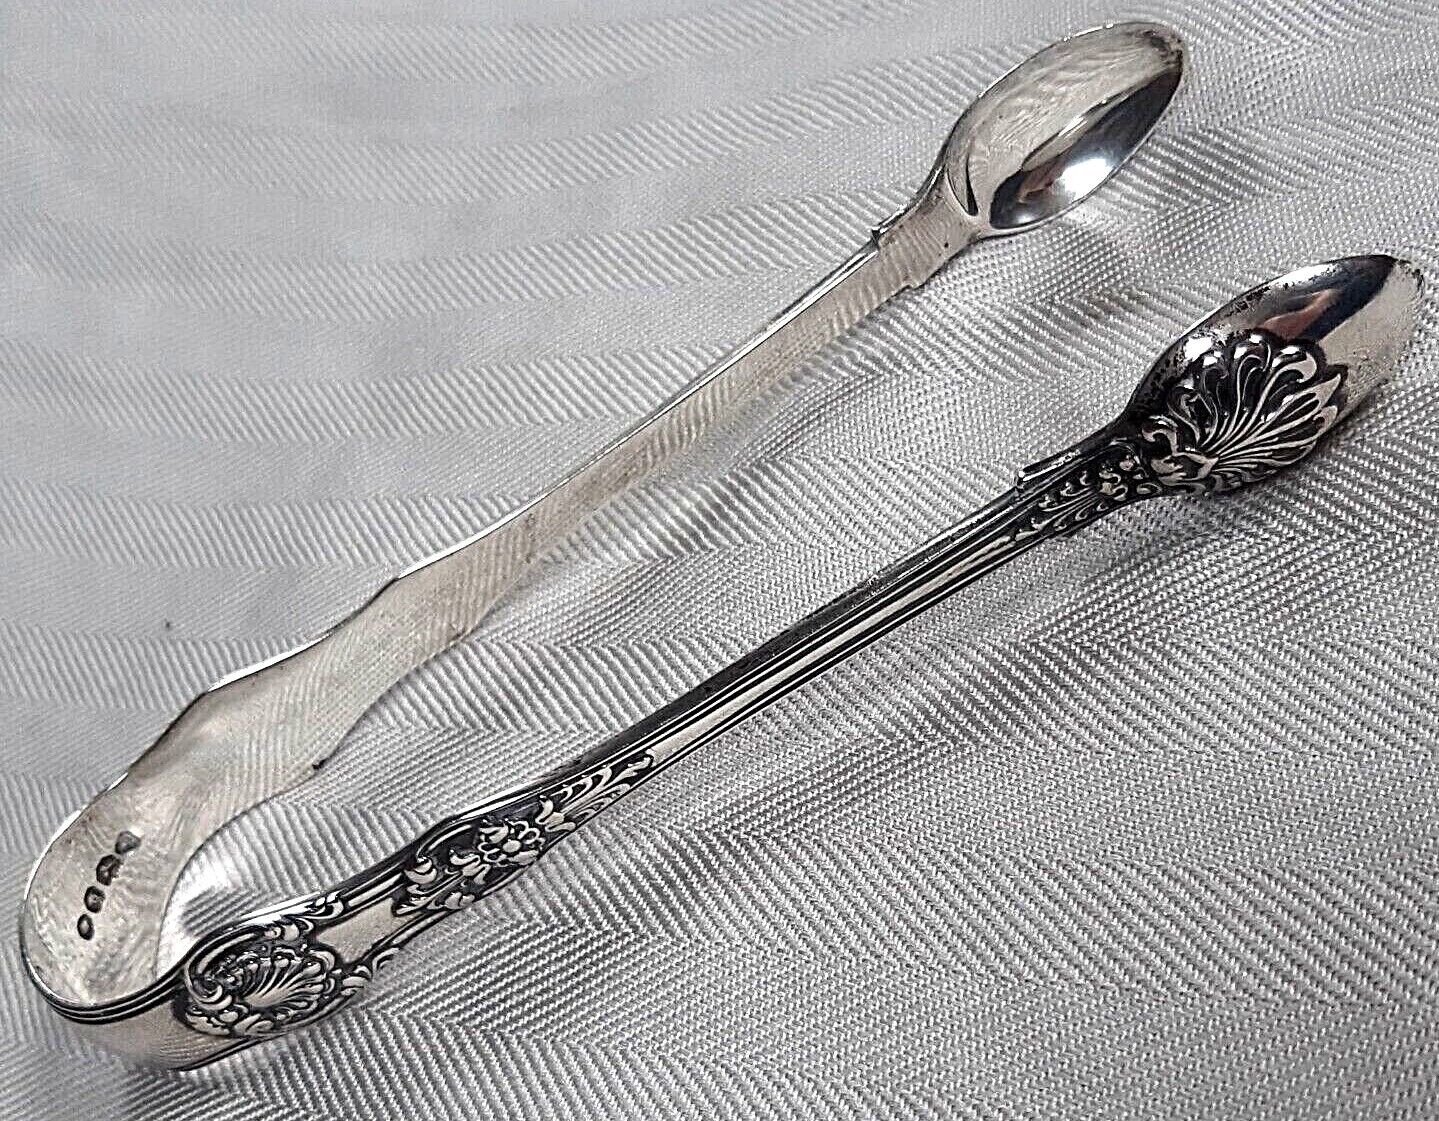 Lovely William IV Sterling Silver Queen's Pattern Sugar Nips William Eaton 1837